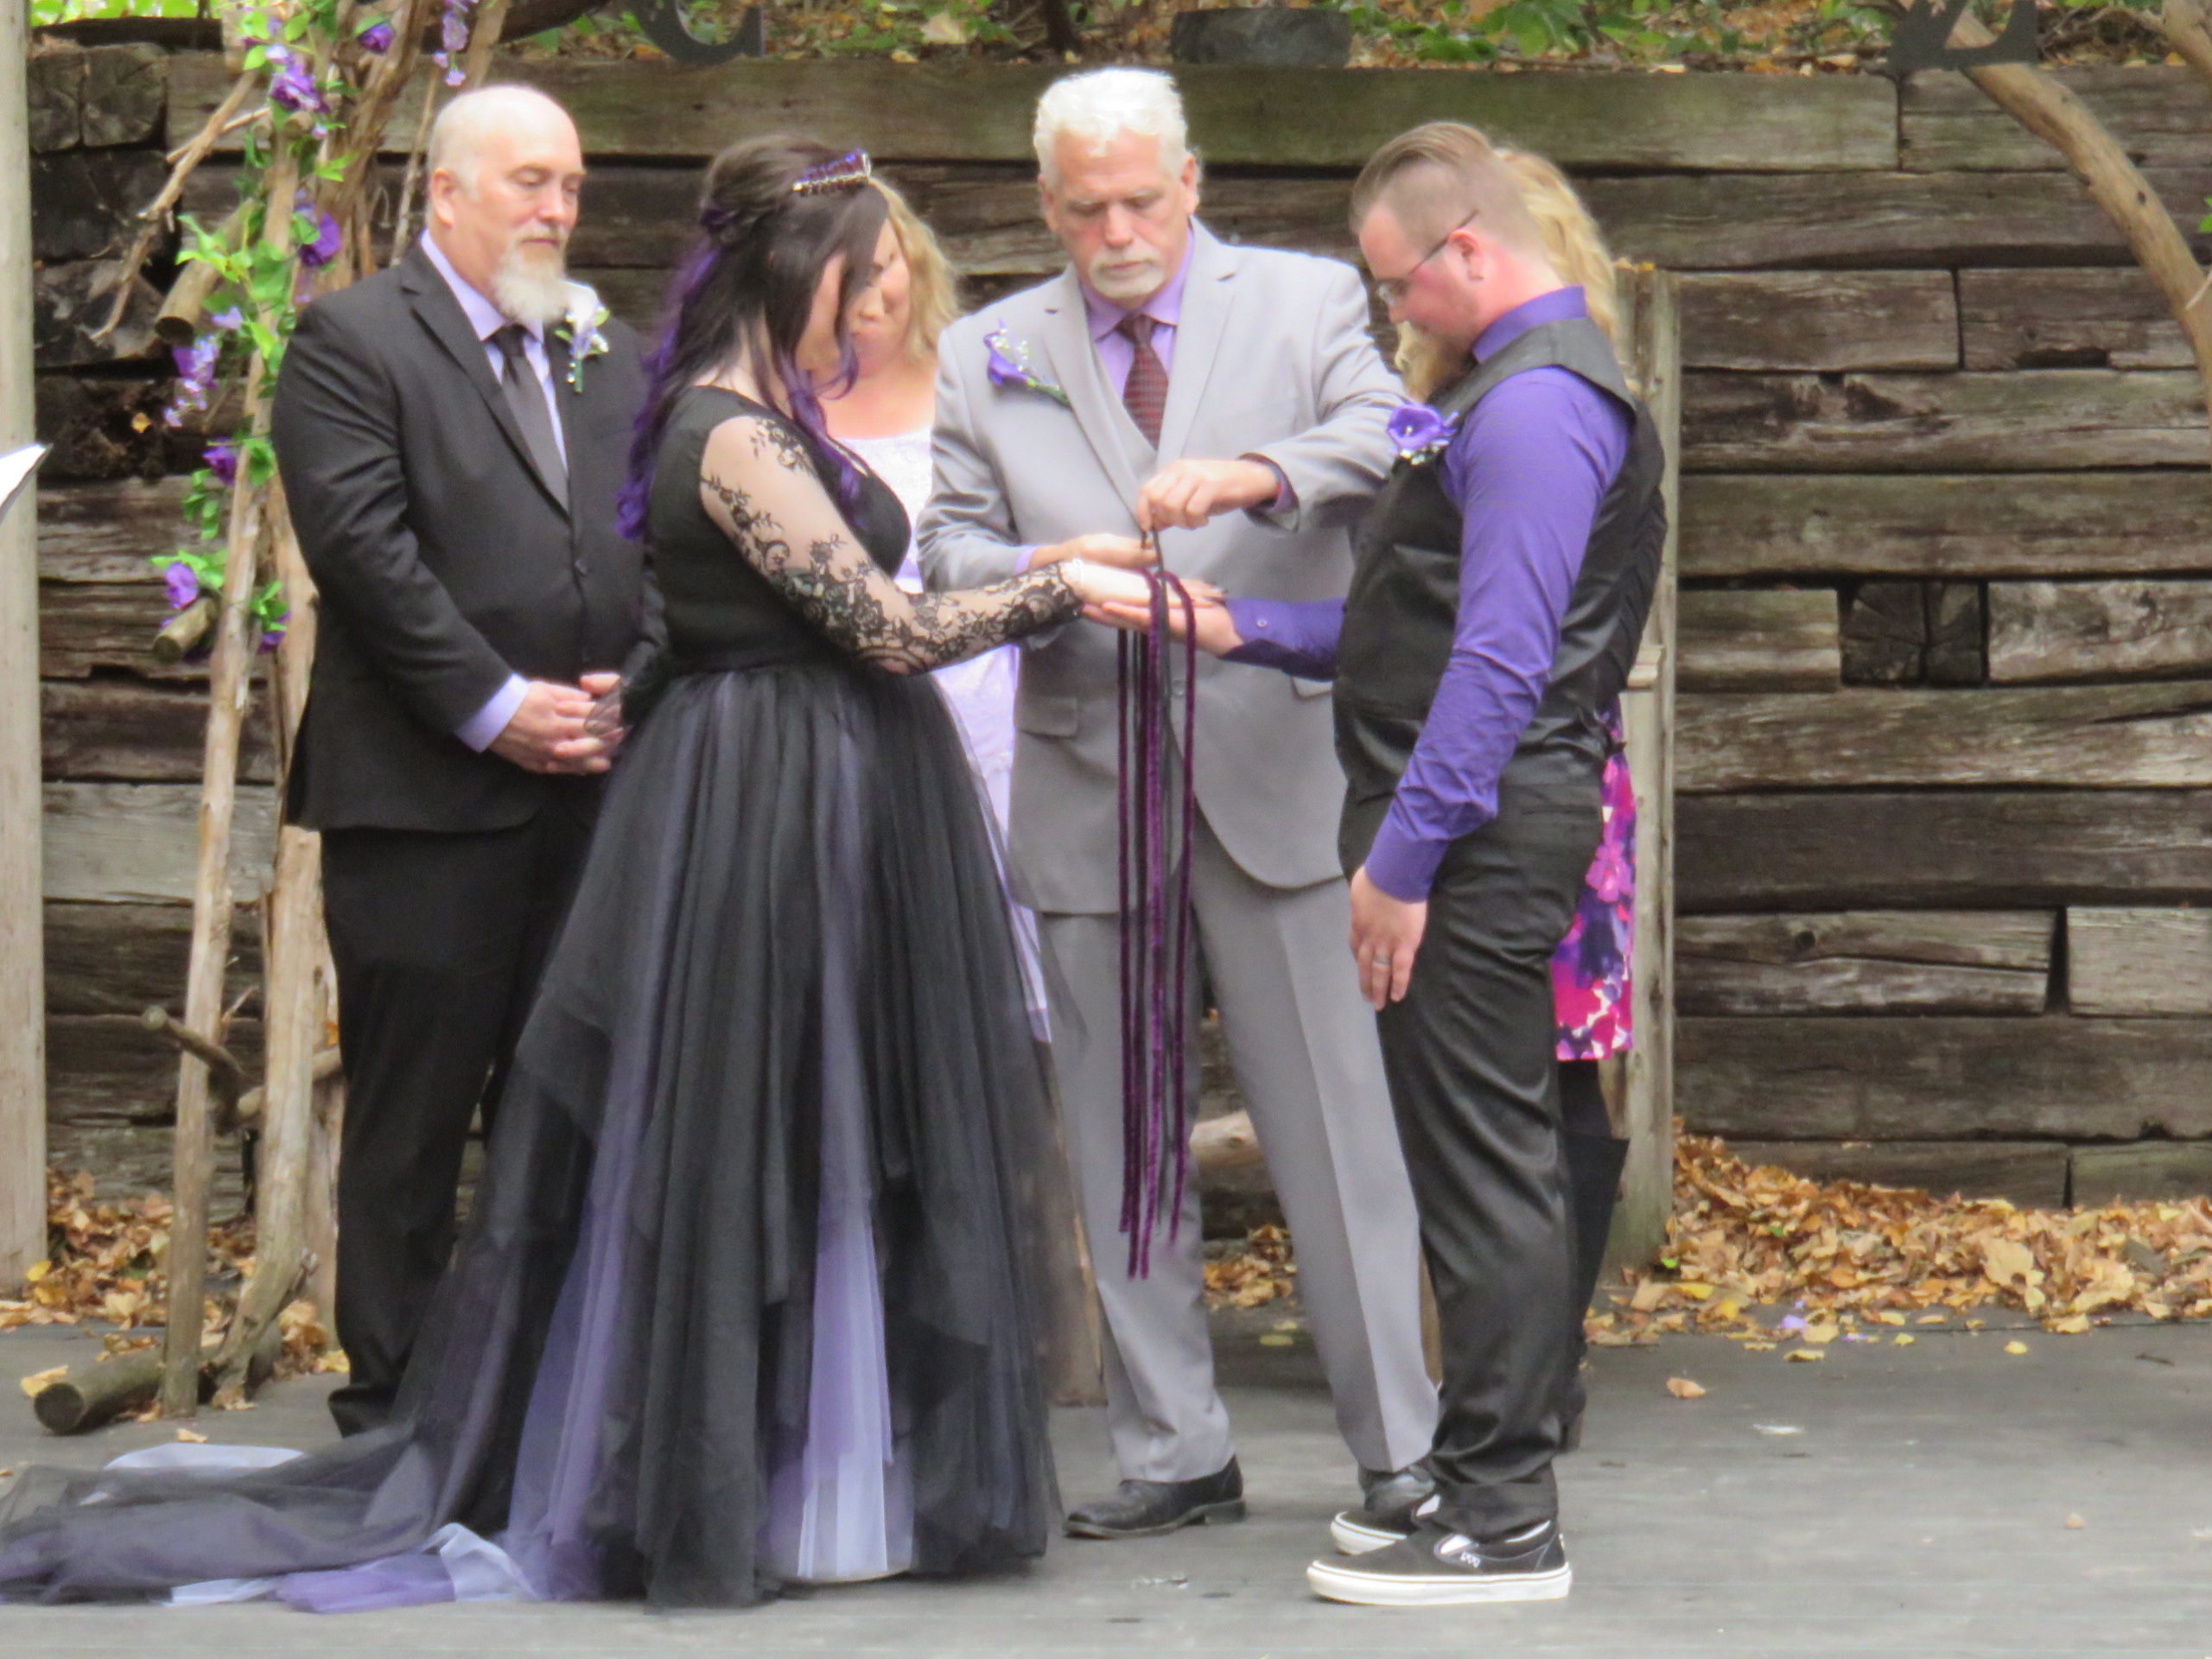 A black and purple wedding dress for a colorful wedding